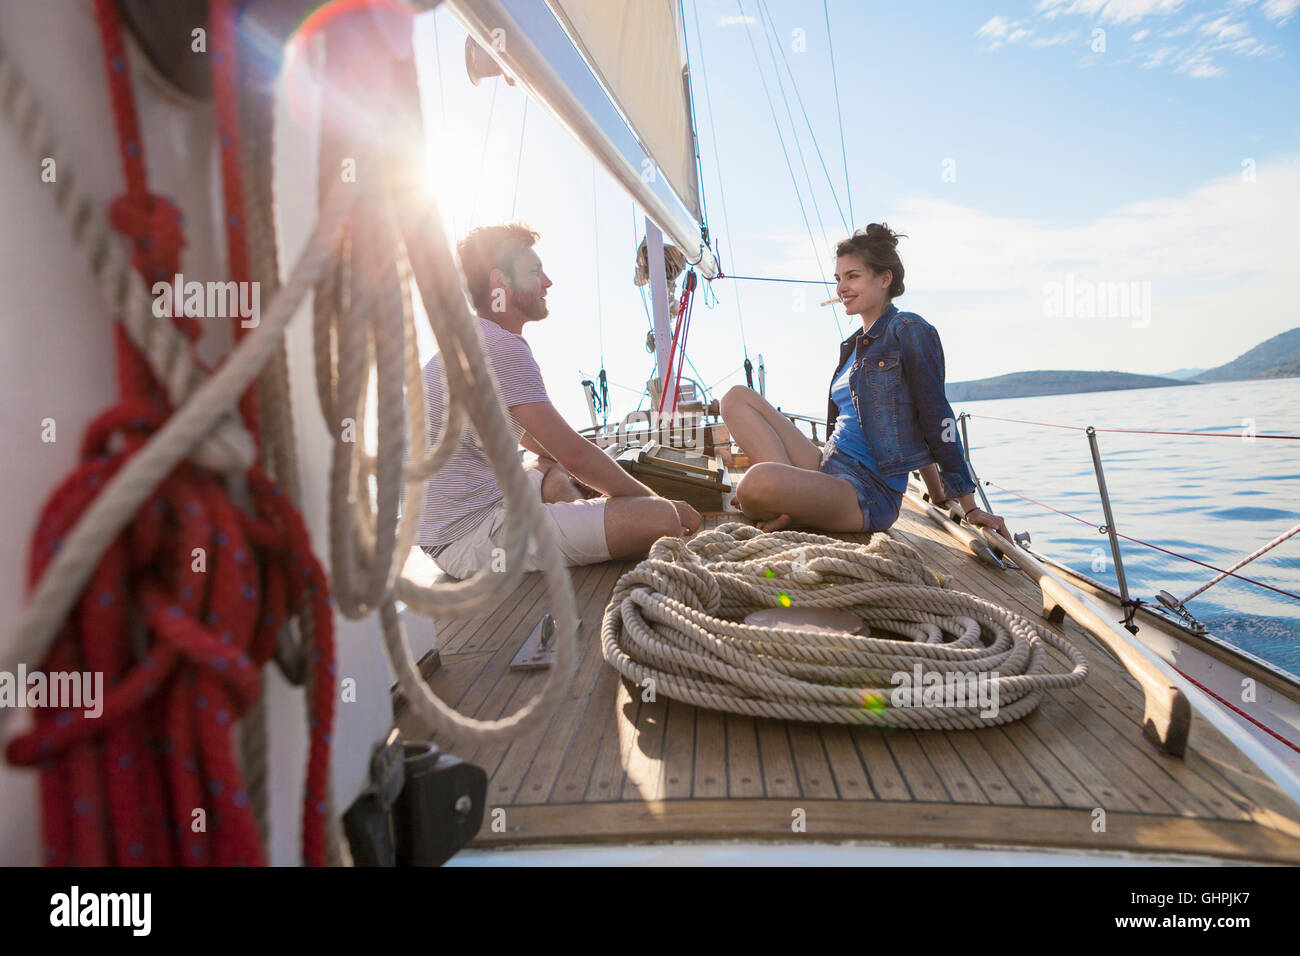 Young couple sitting face to face on sailboat Stock Photo